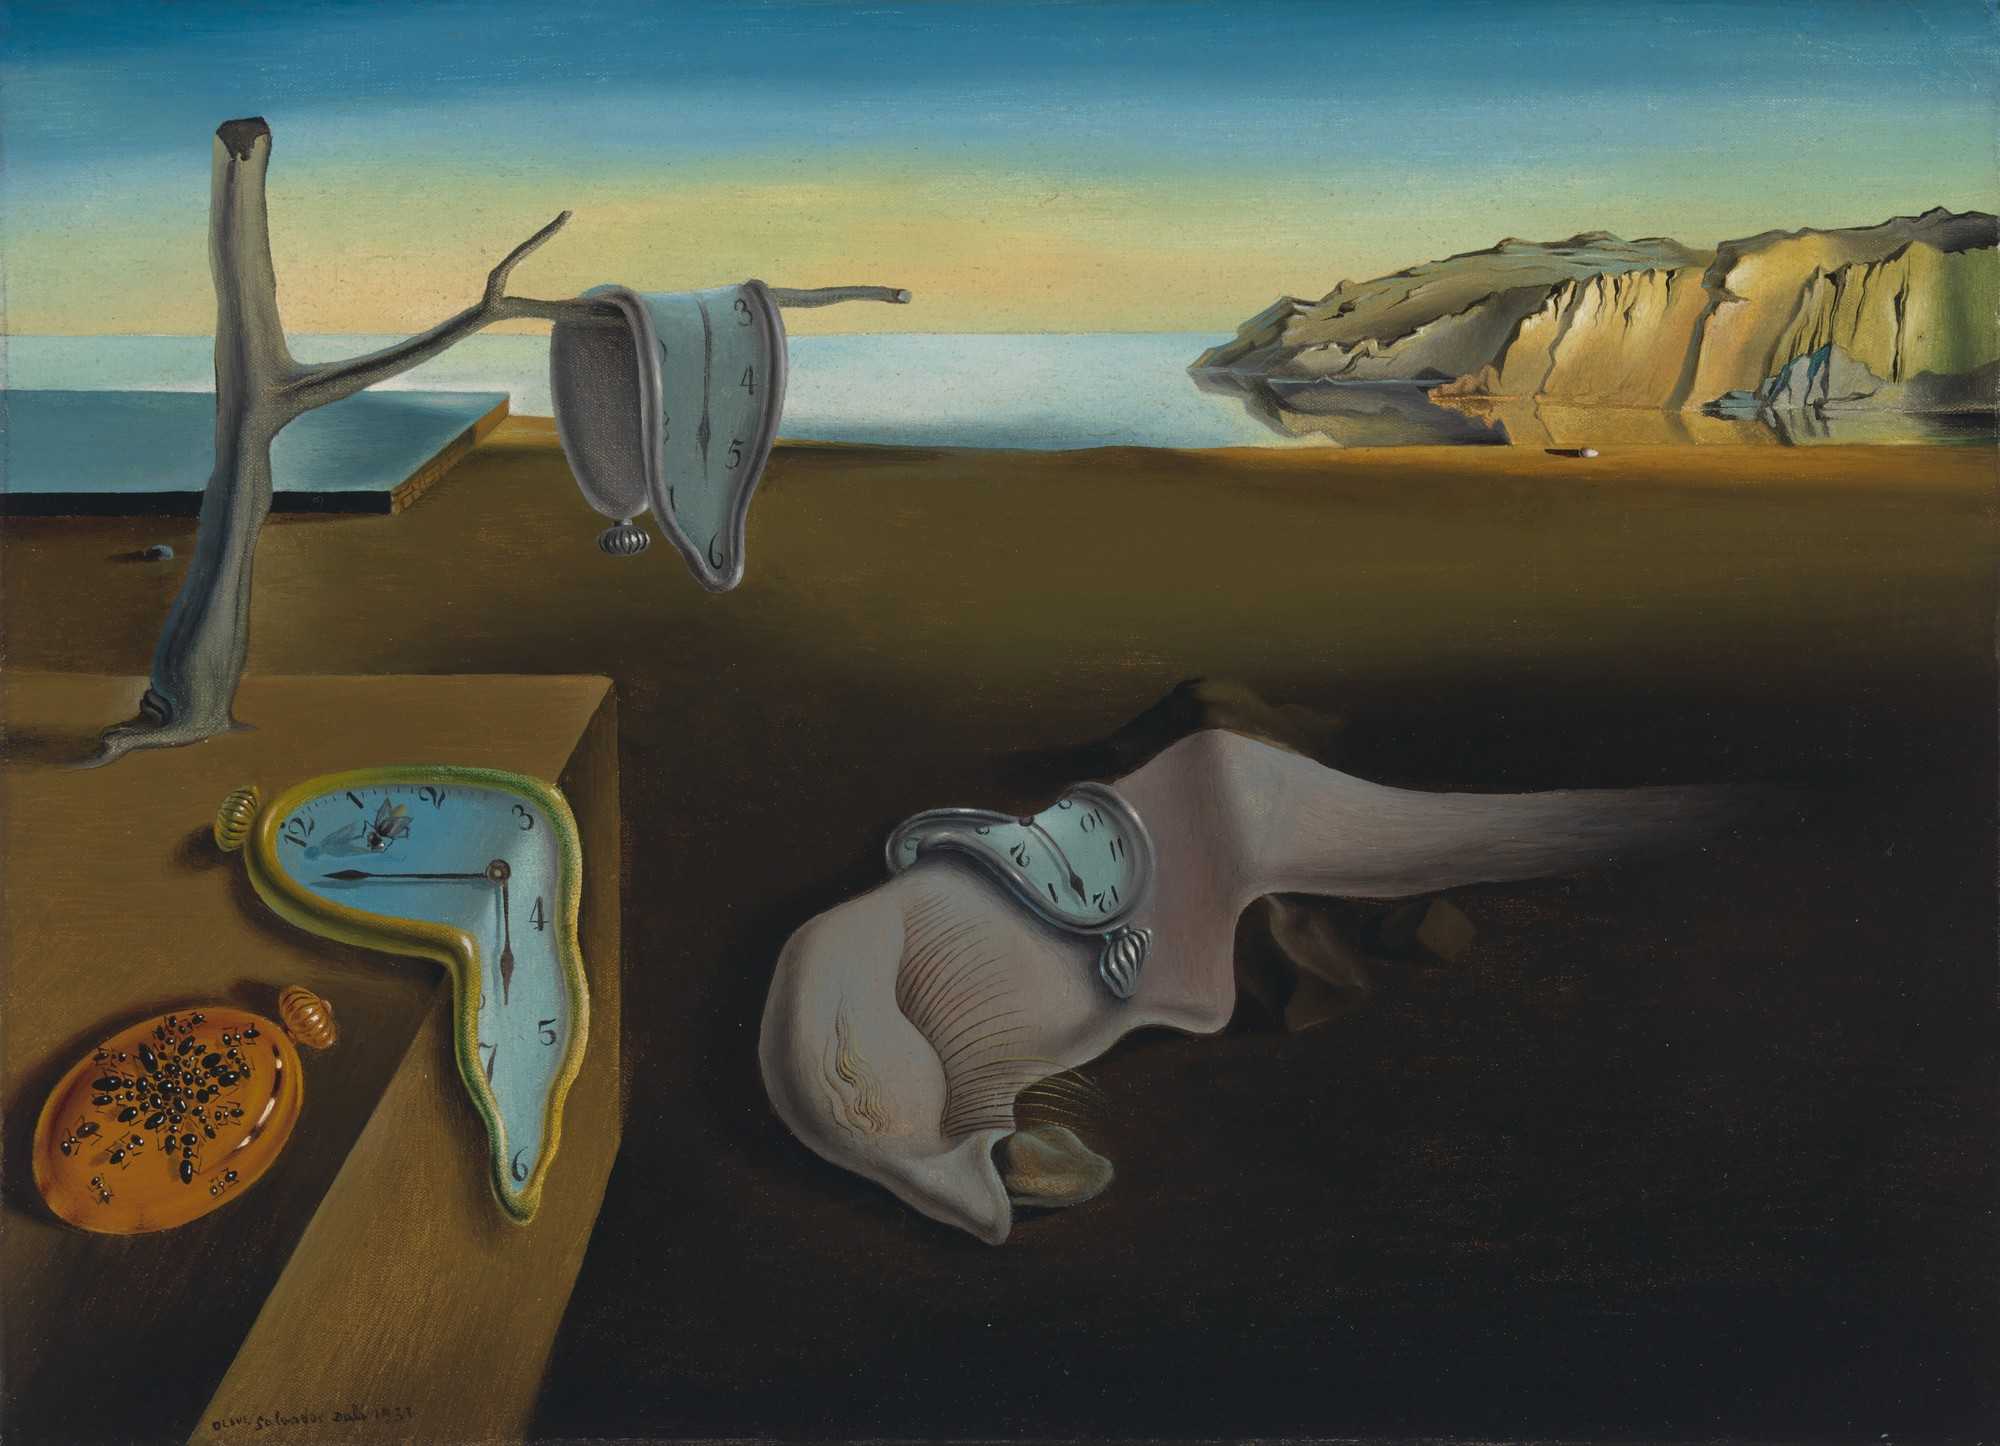 Find out more about Salvador Dalí - The Persistence of Memory